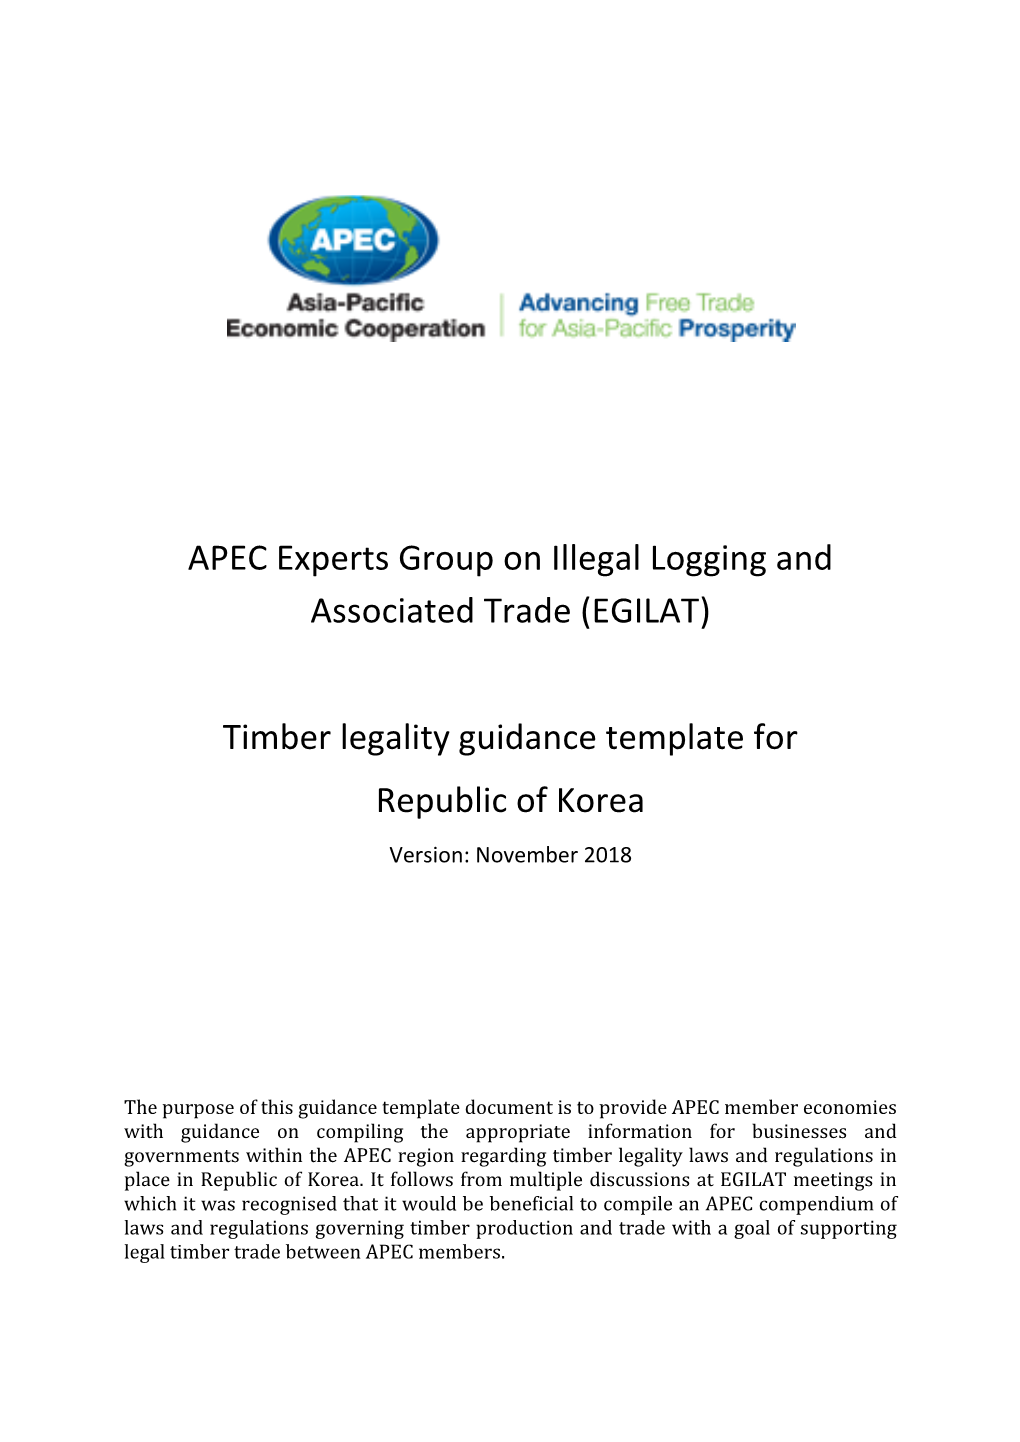 Timber Legality Guidance Template for Korea